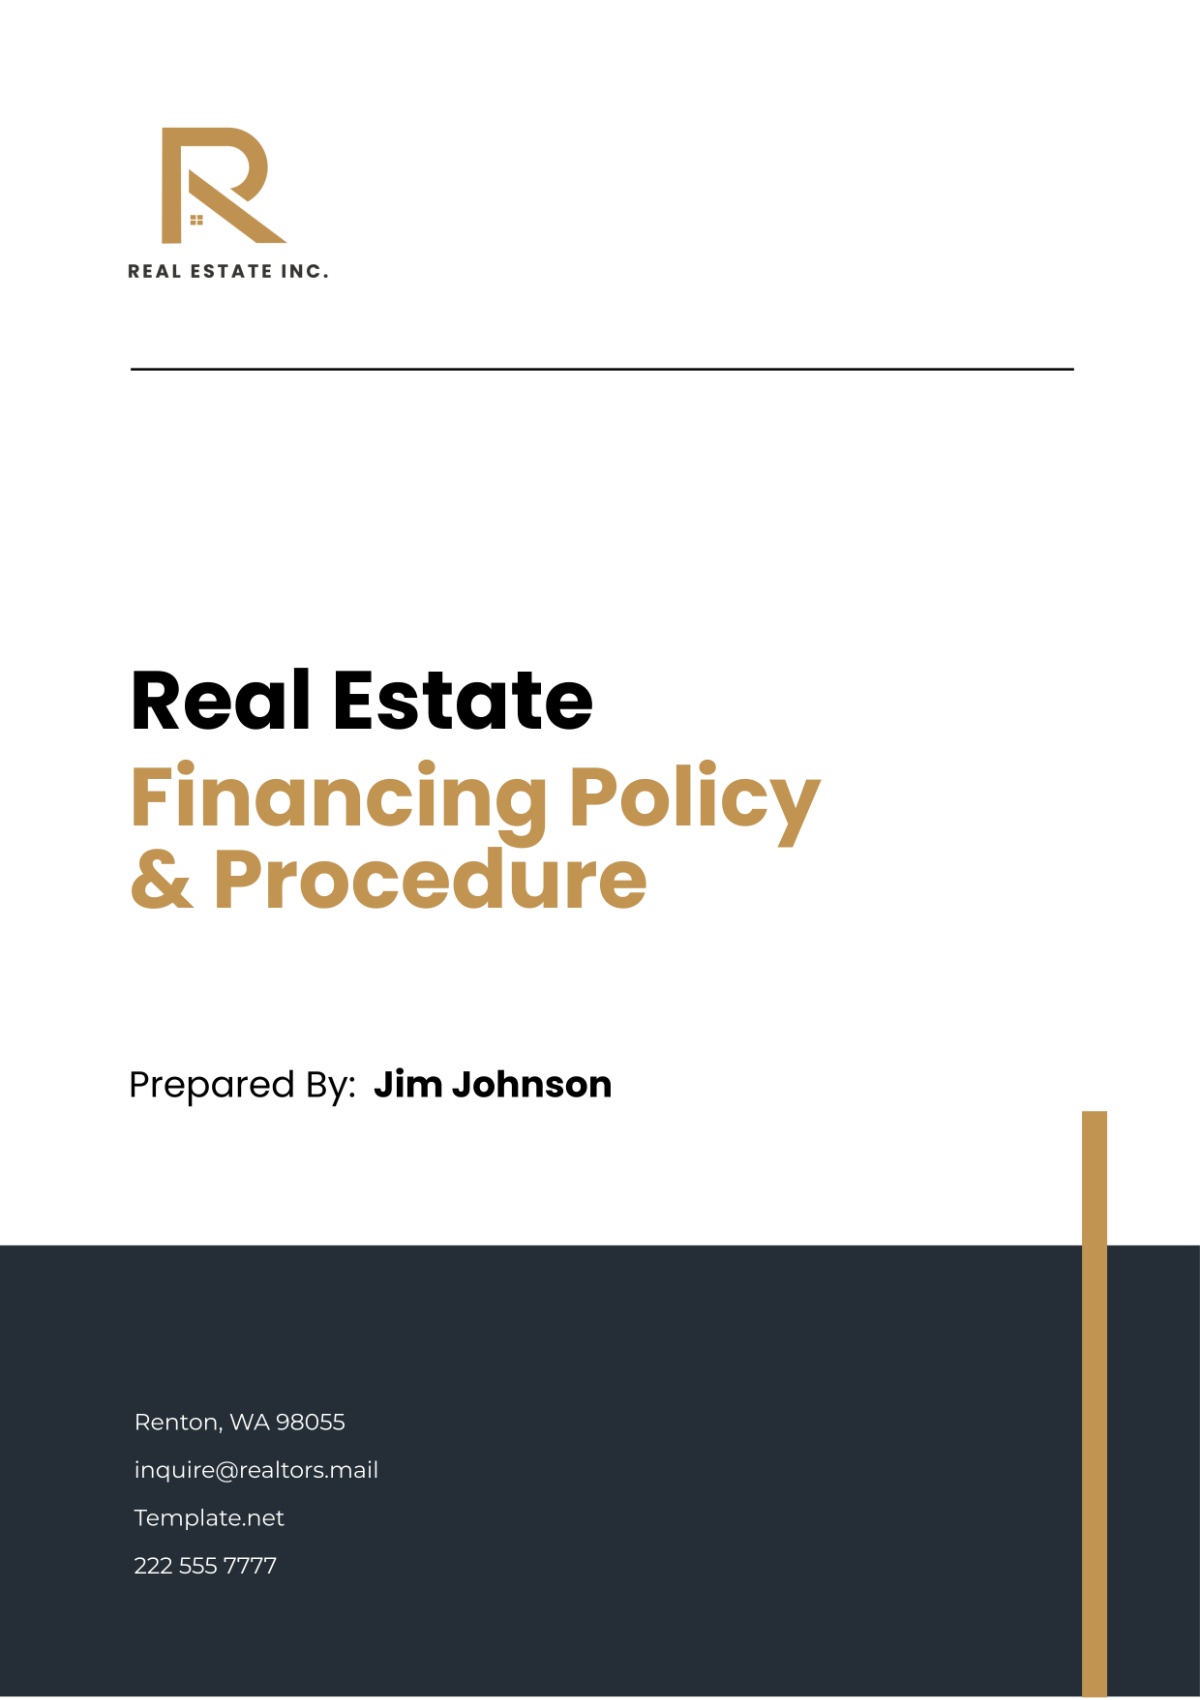 Real Estate Financing Policy & Procedure Template